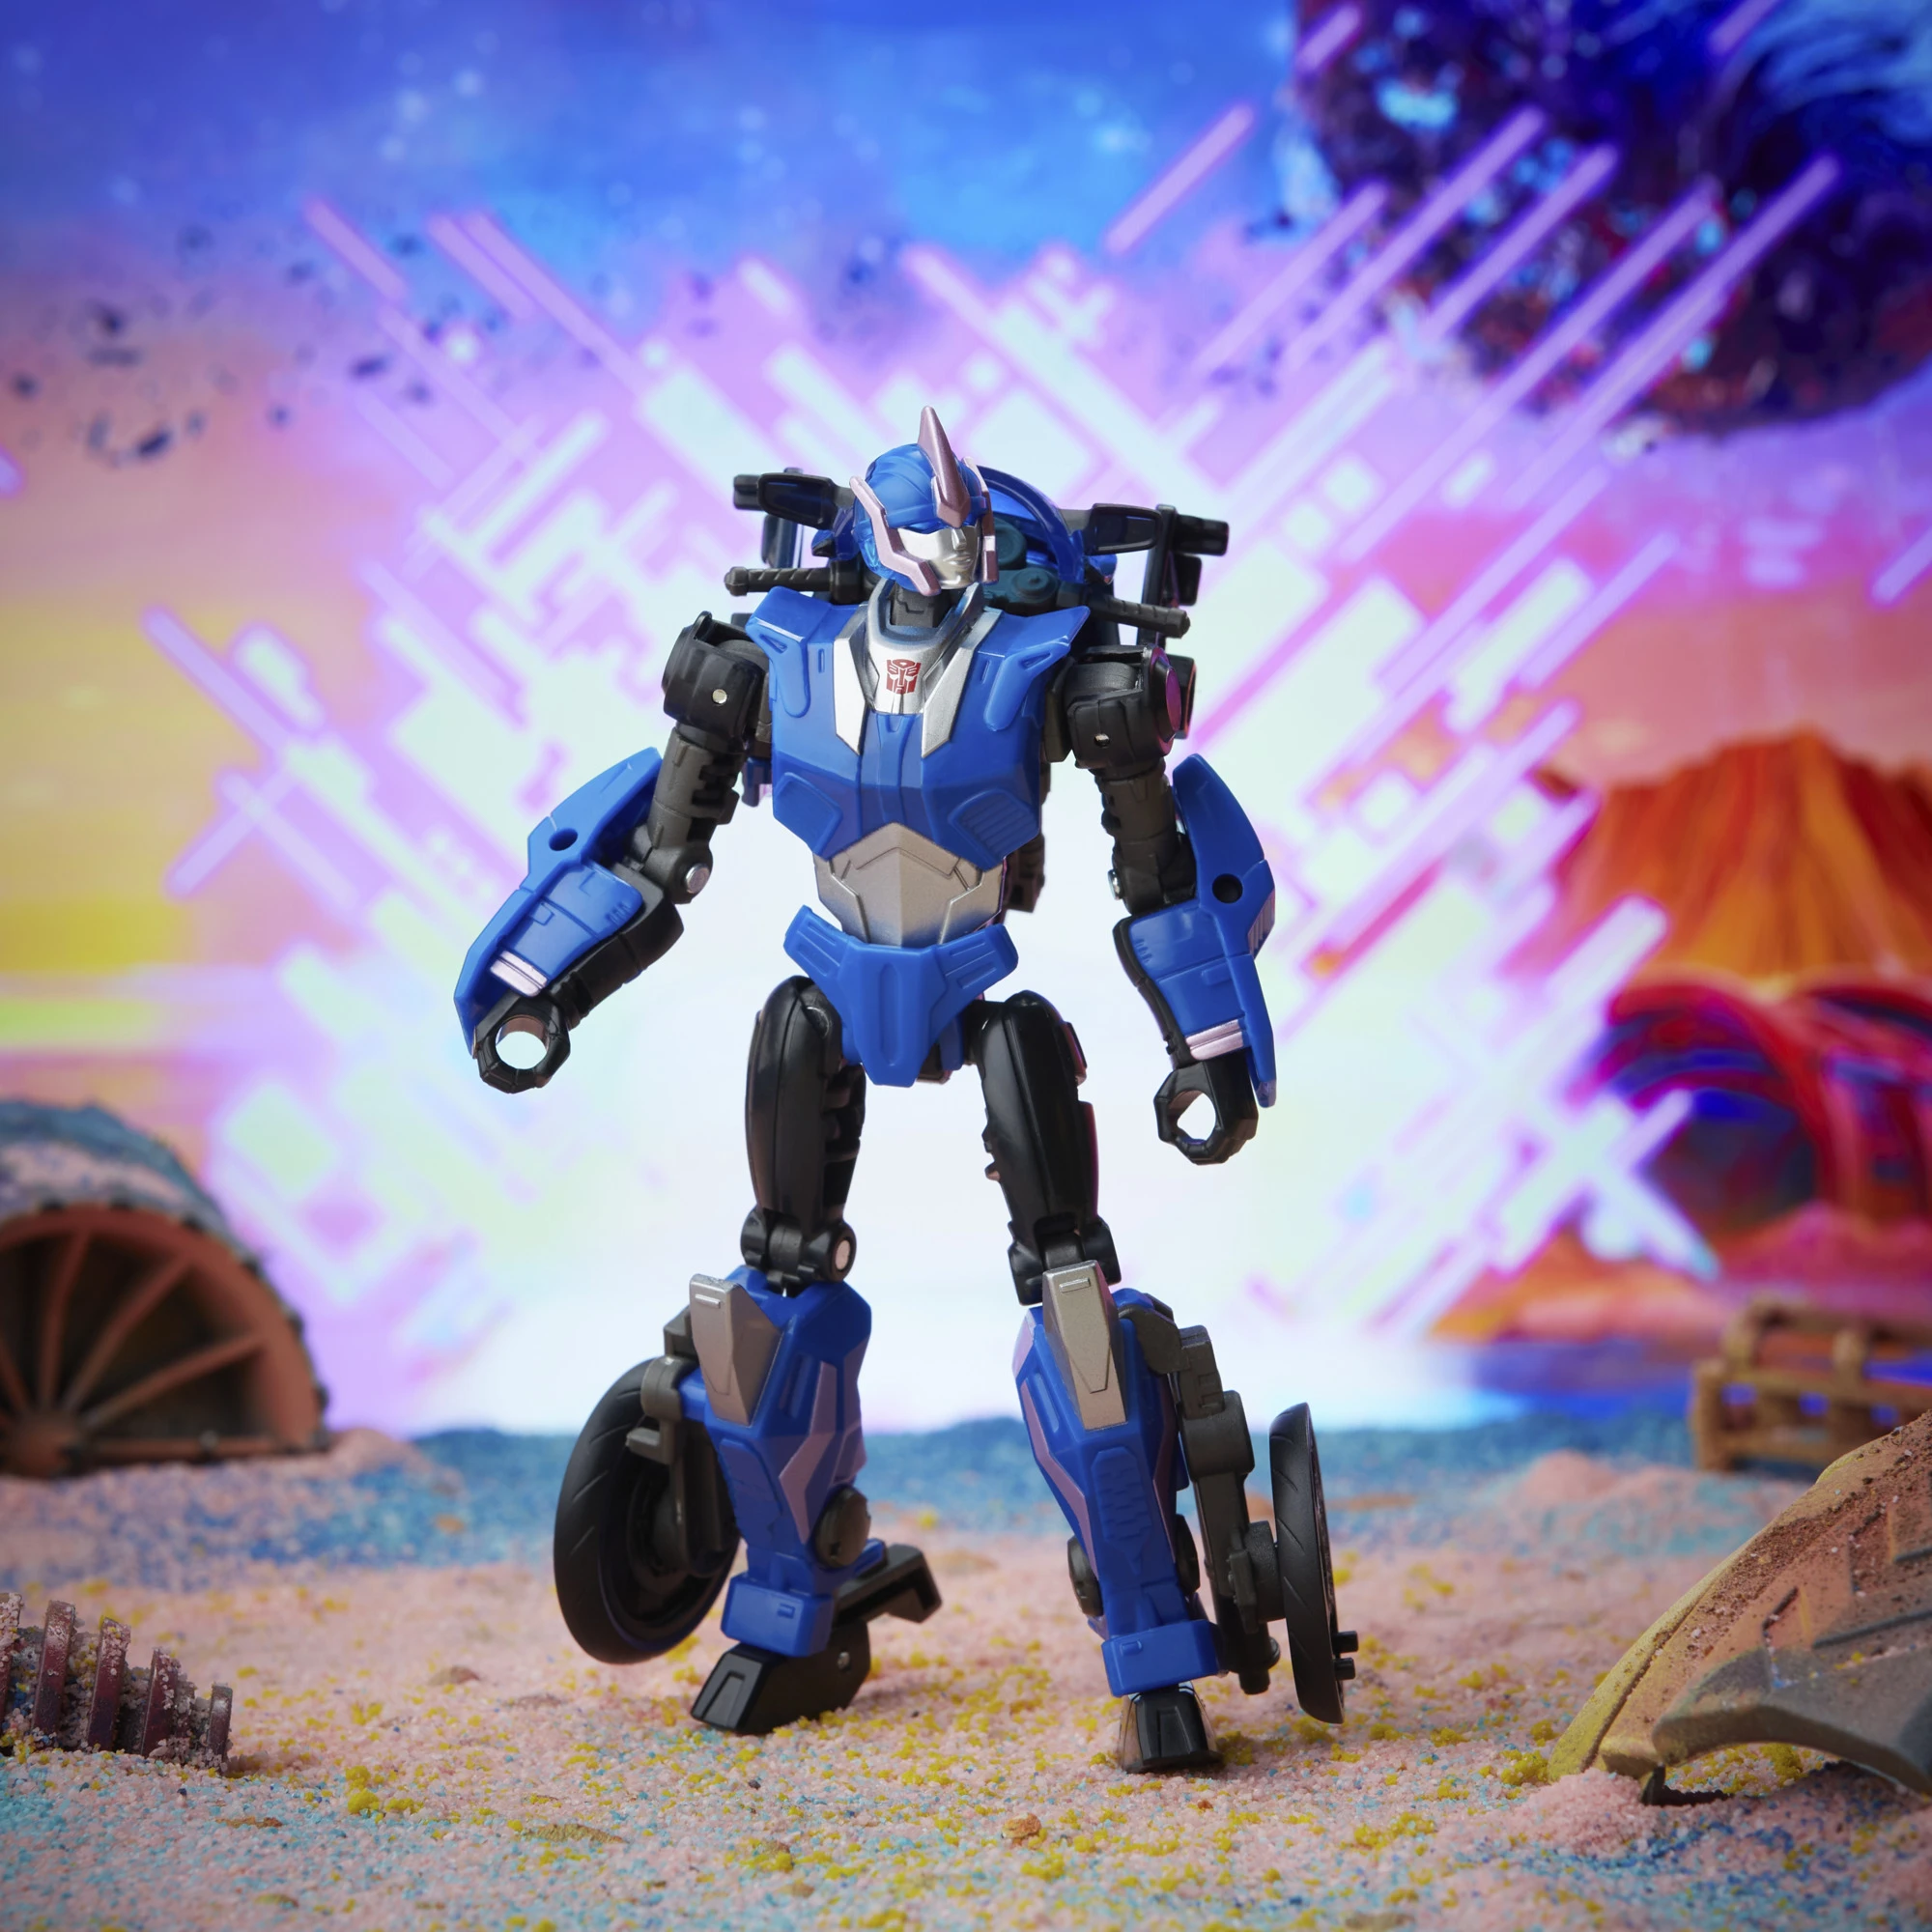 Transformers EarthSpark Wave 2 Official Stock Images & Product Descriptions  - Transformers News - TFW2005